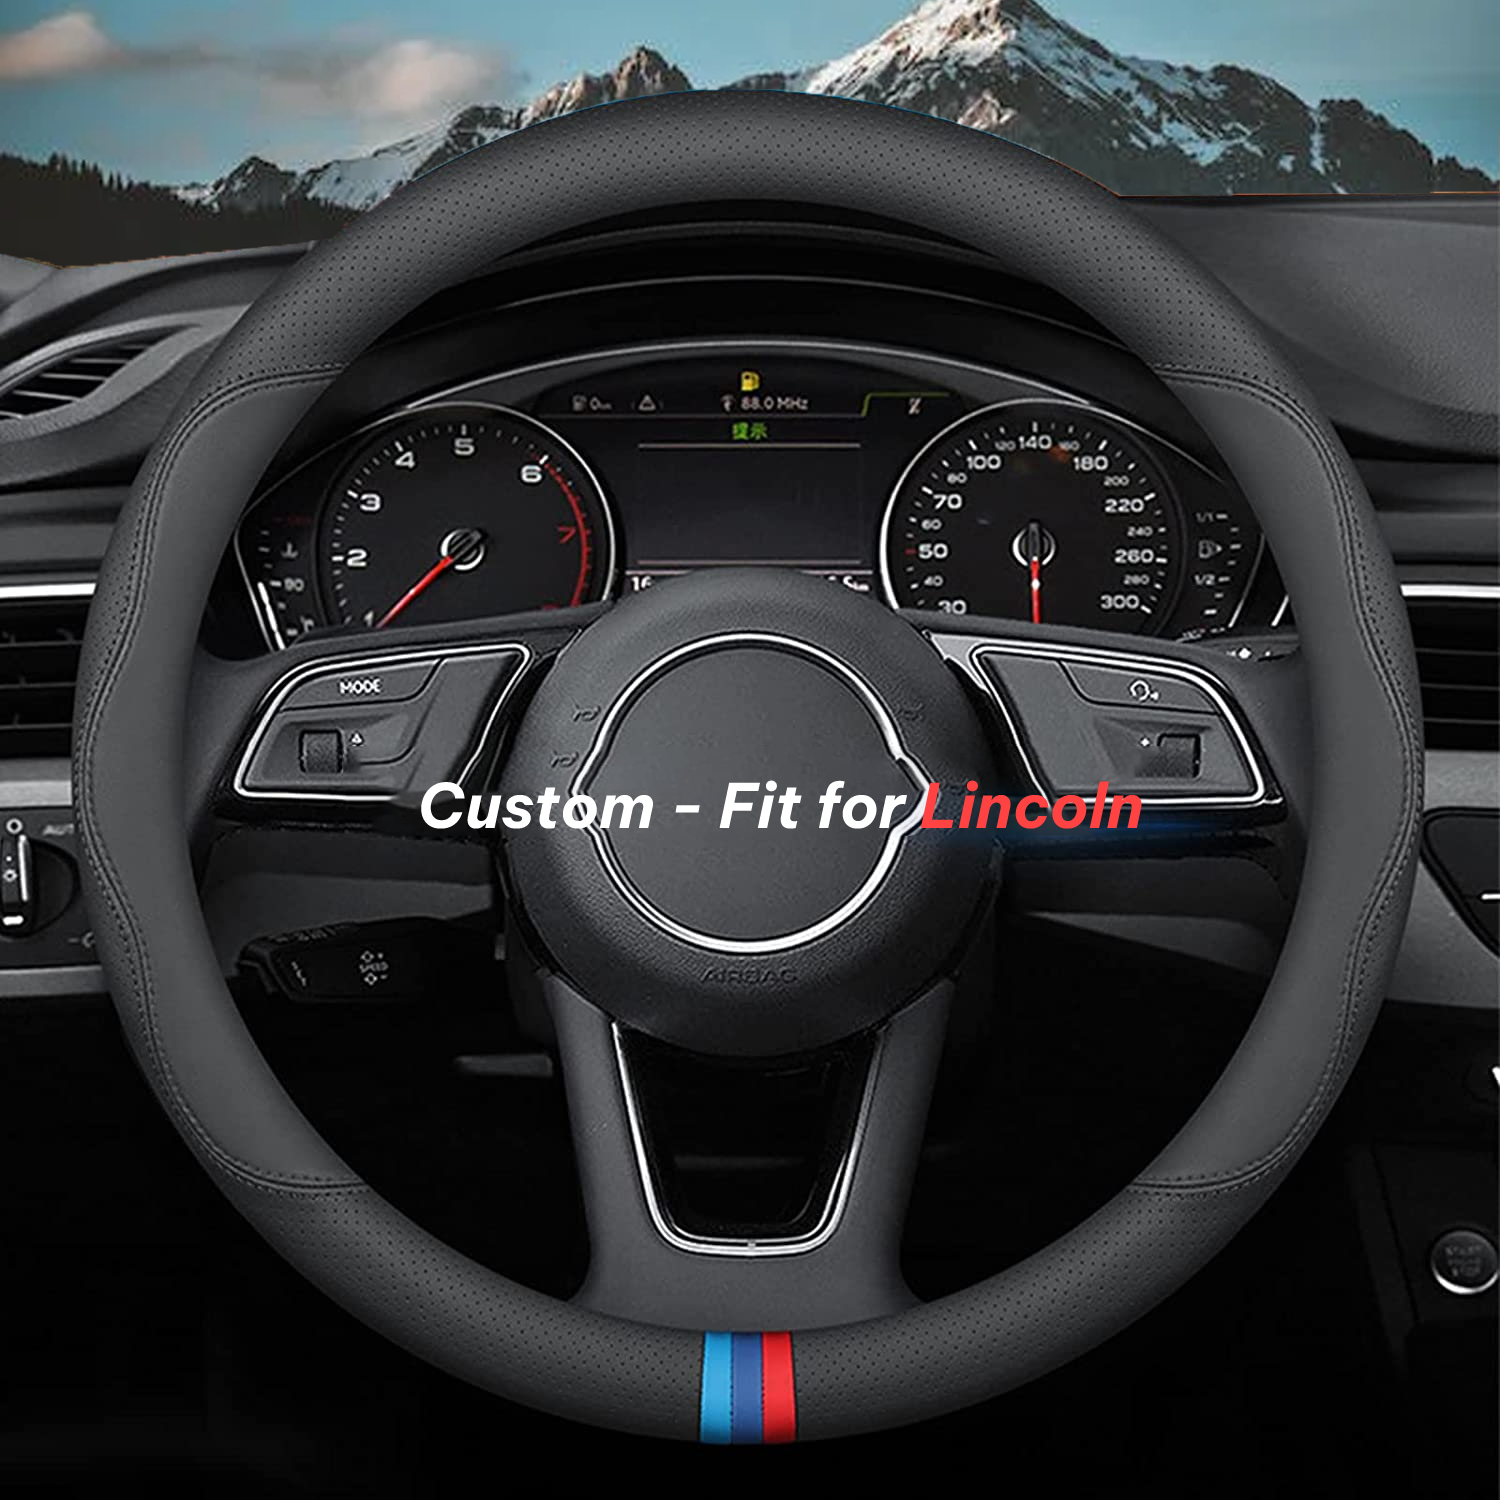 Car Steering Wheel Cover 2024 Update Version, Custom-Fit for Car, Premium Leather Car Steering Wheel Cover with Logo, Car Accessories DLLI222